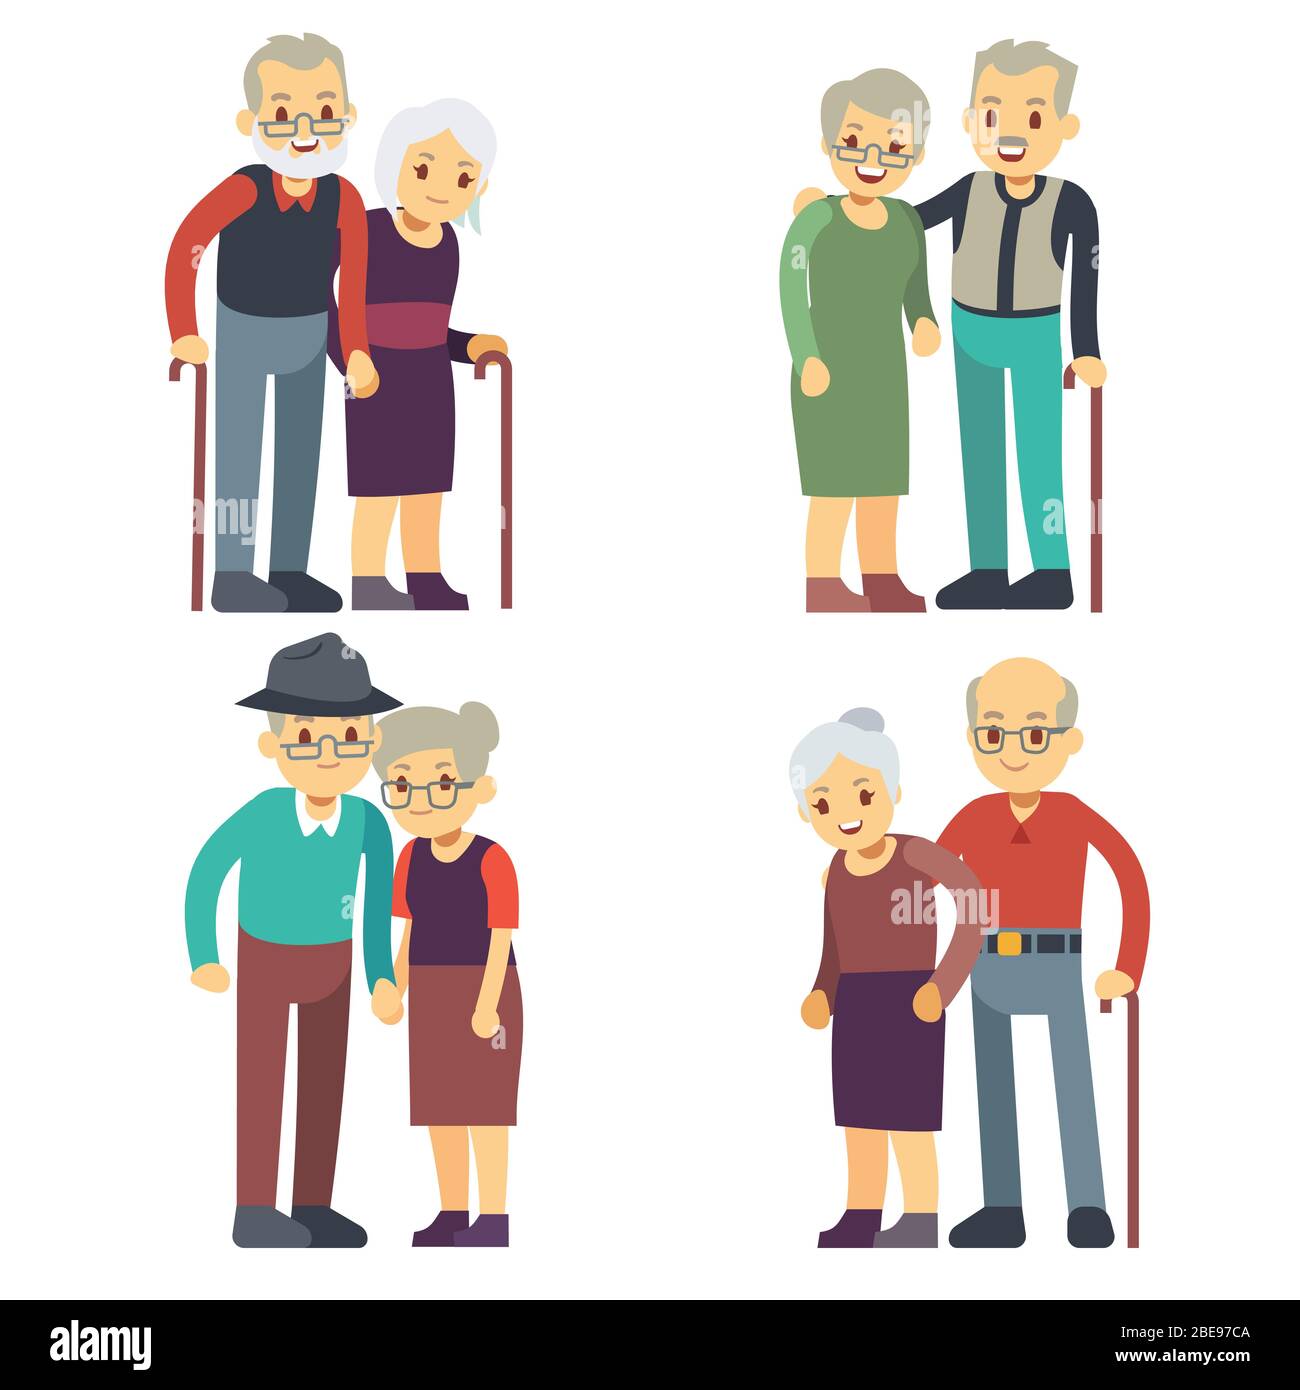 Smiling and happy old couples. Elderly families cartoon characters vector set. Grandfather and grandmother couple, woman and man elderly illustration Stock Vector